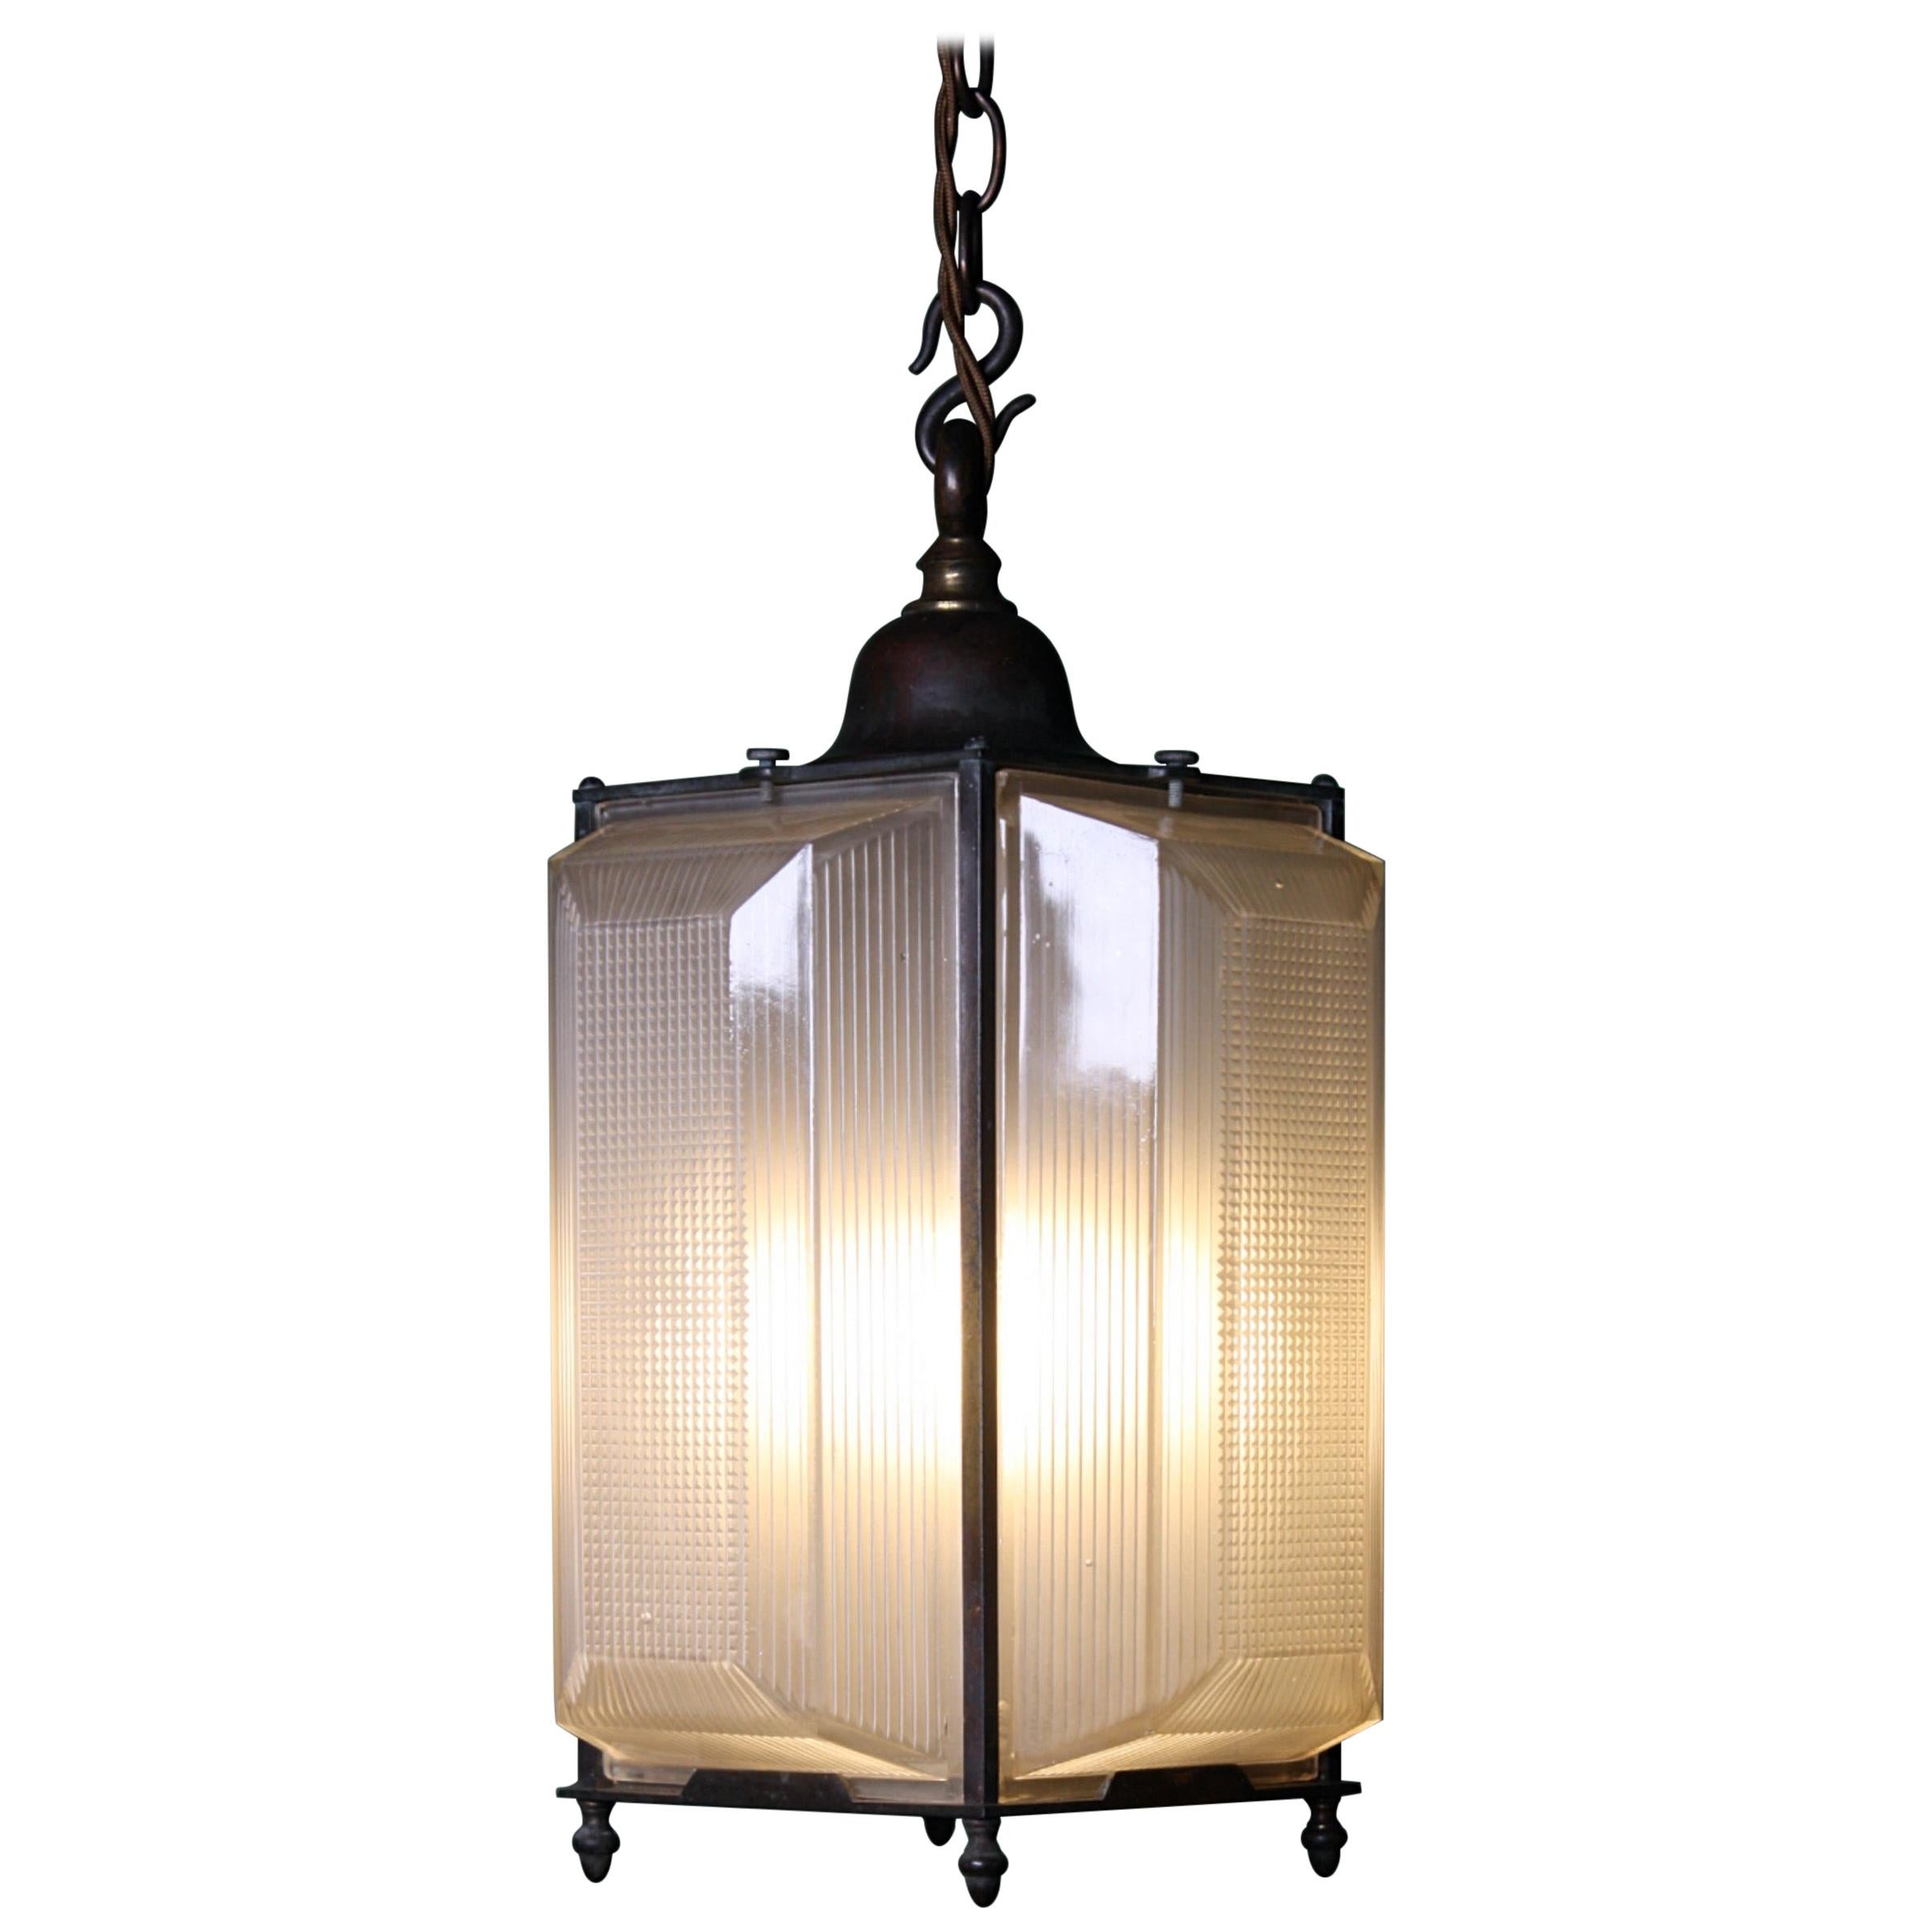 Early 20th Century Prismatic Glass and Bronze Holophane Lantern Light